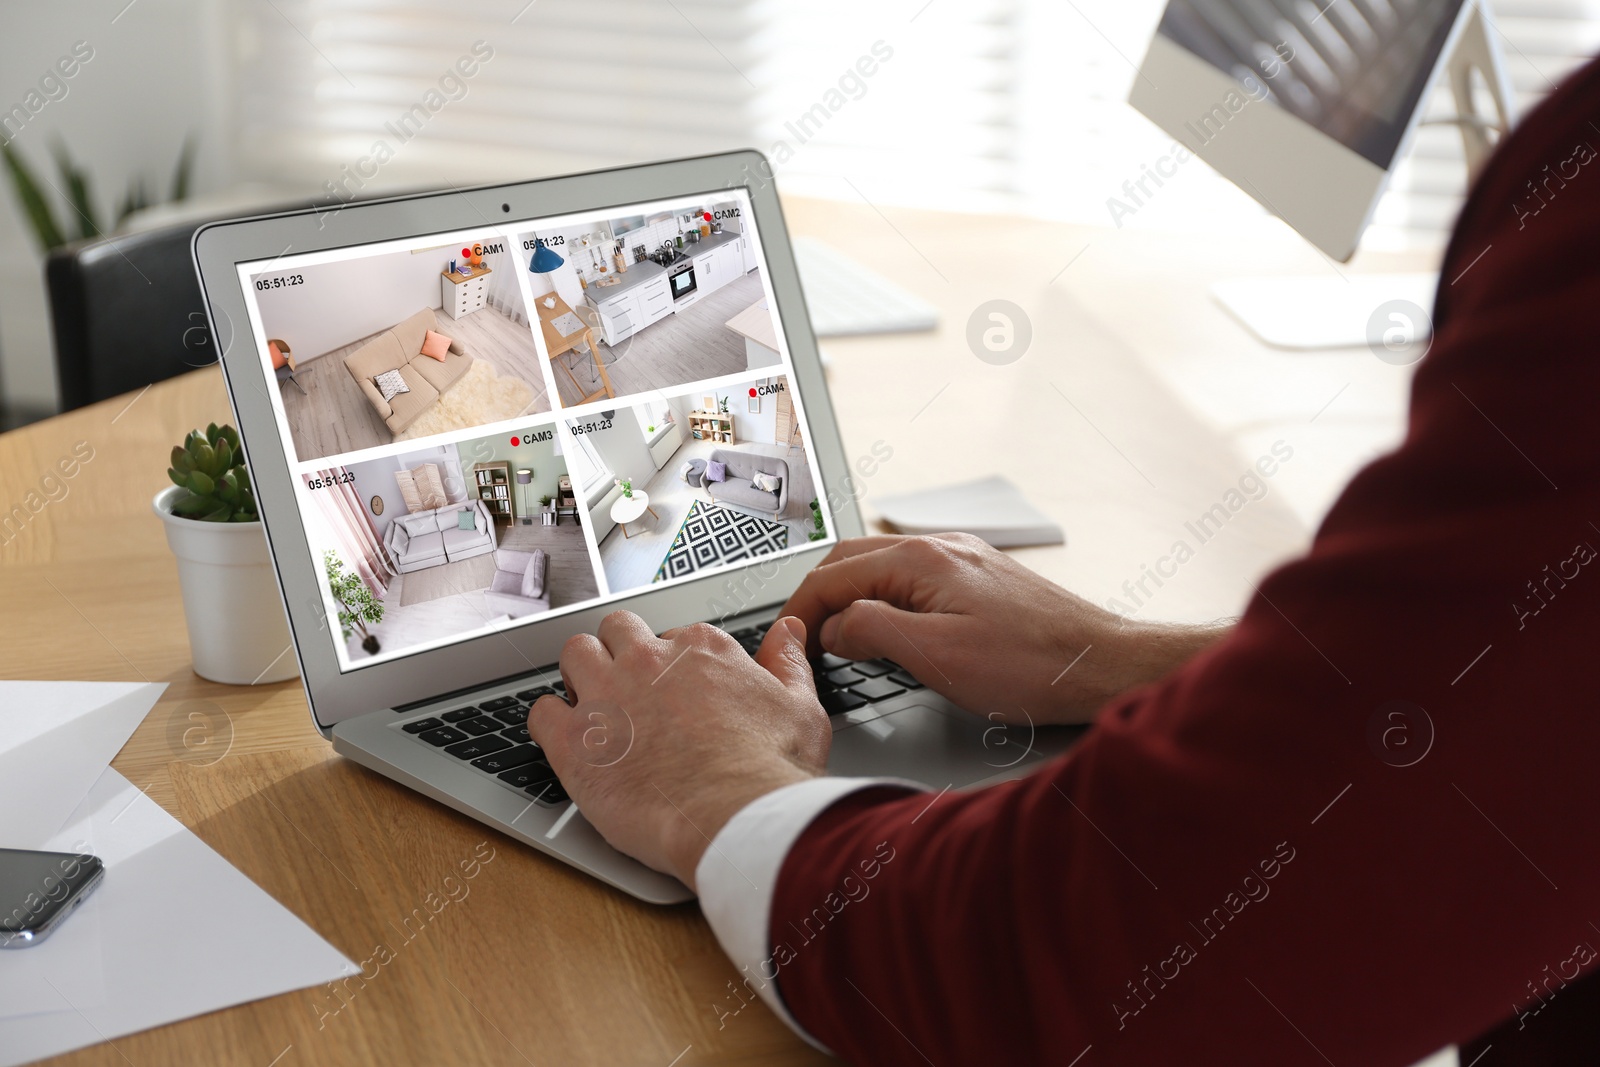 Image of Man monitoring modern CCTV cameras at wooden table, closeup. Smart home security system